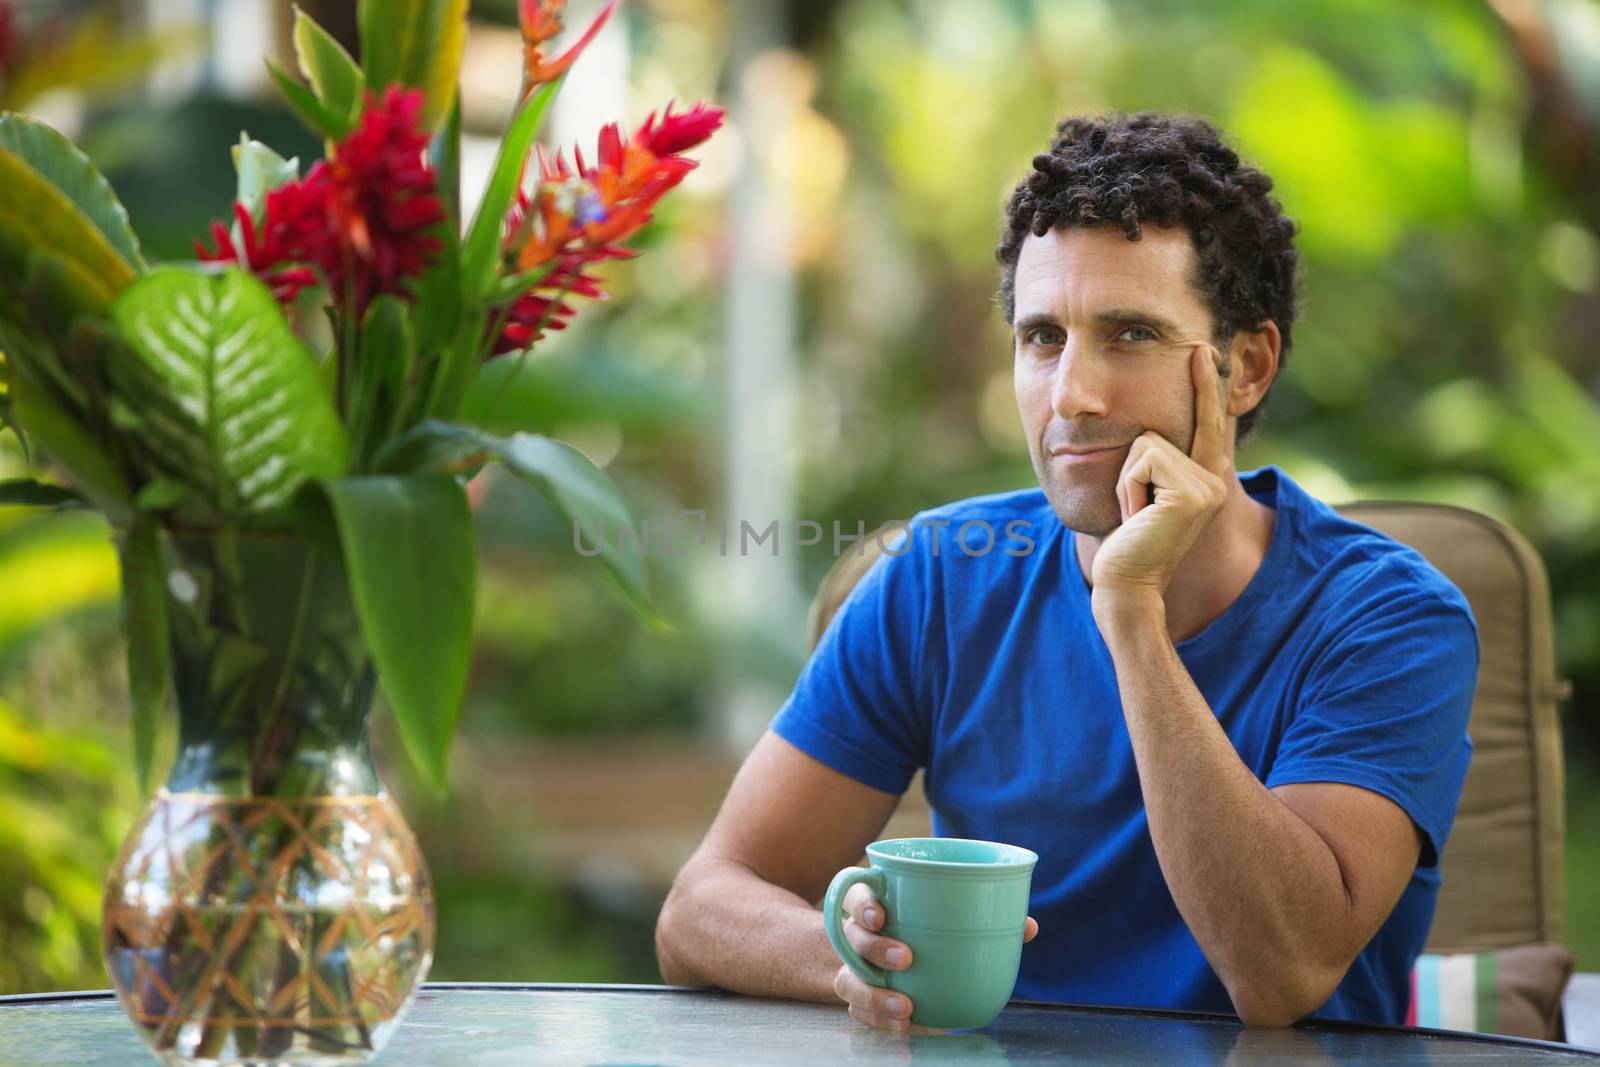 Serious male adult sitting outdoors with hand on chin